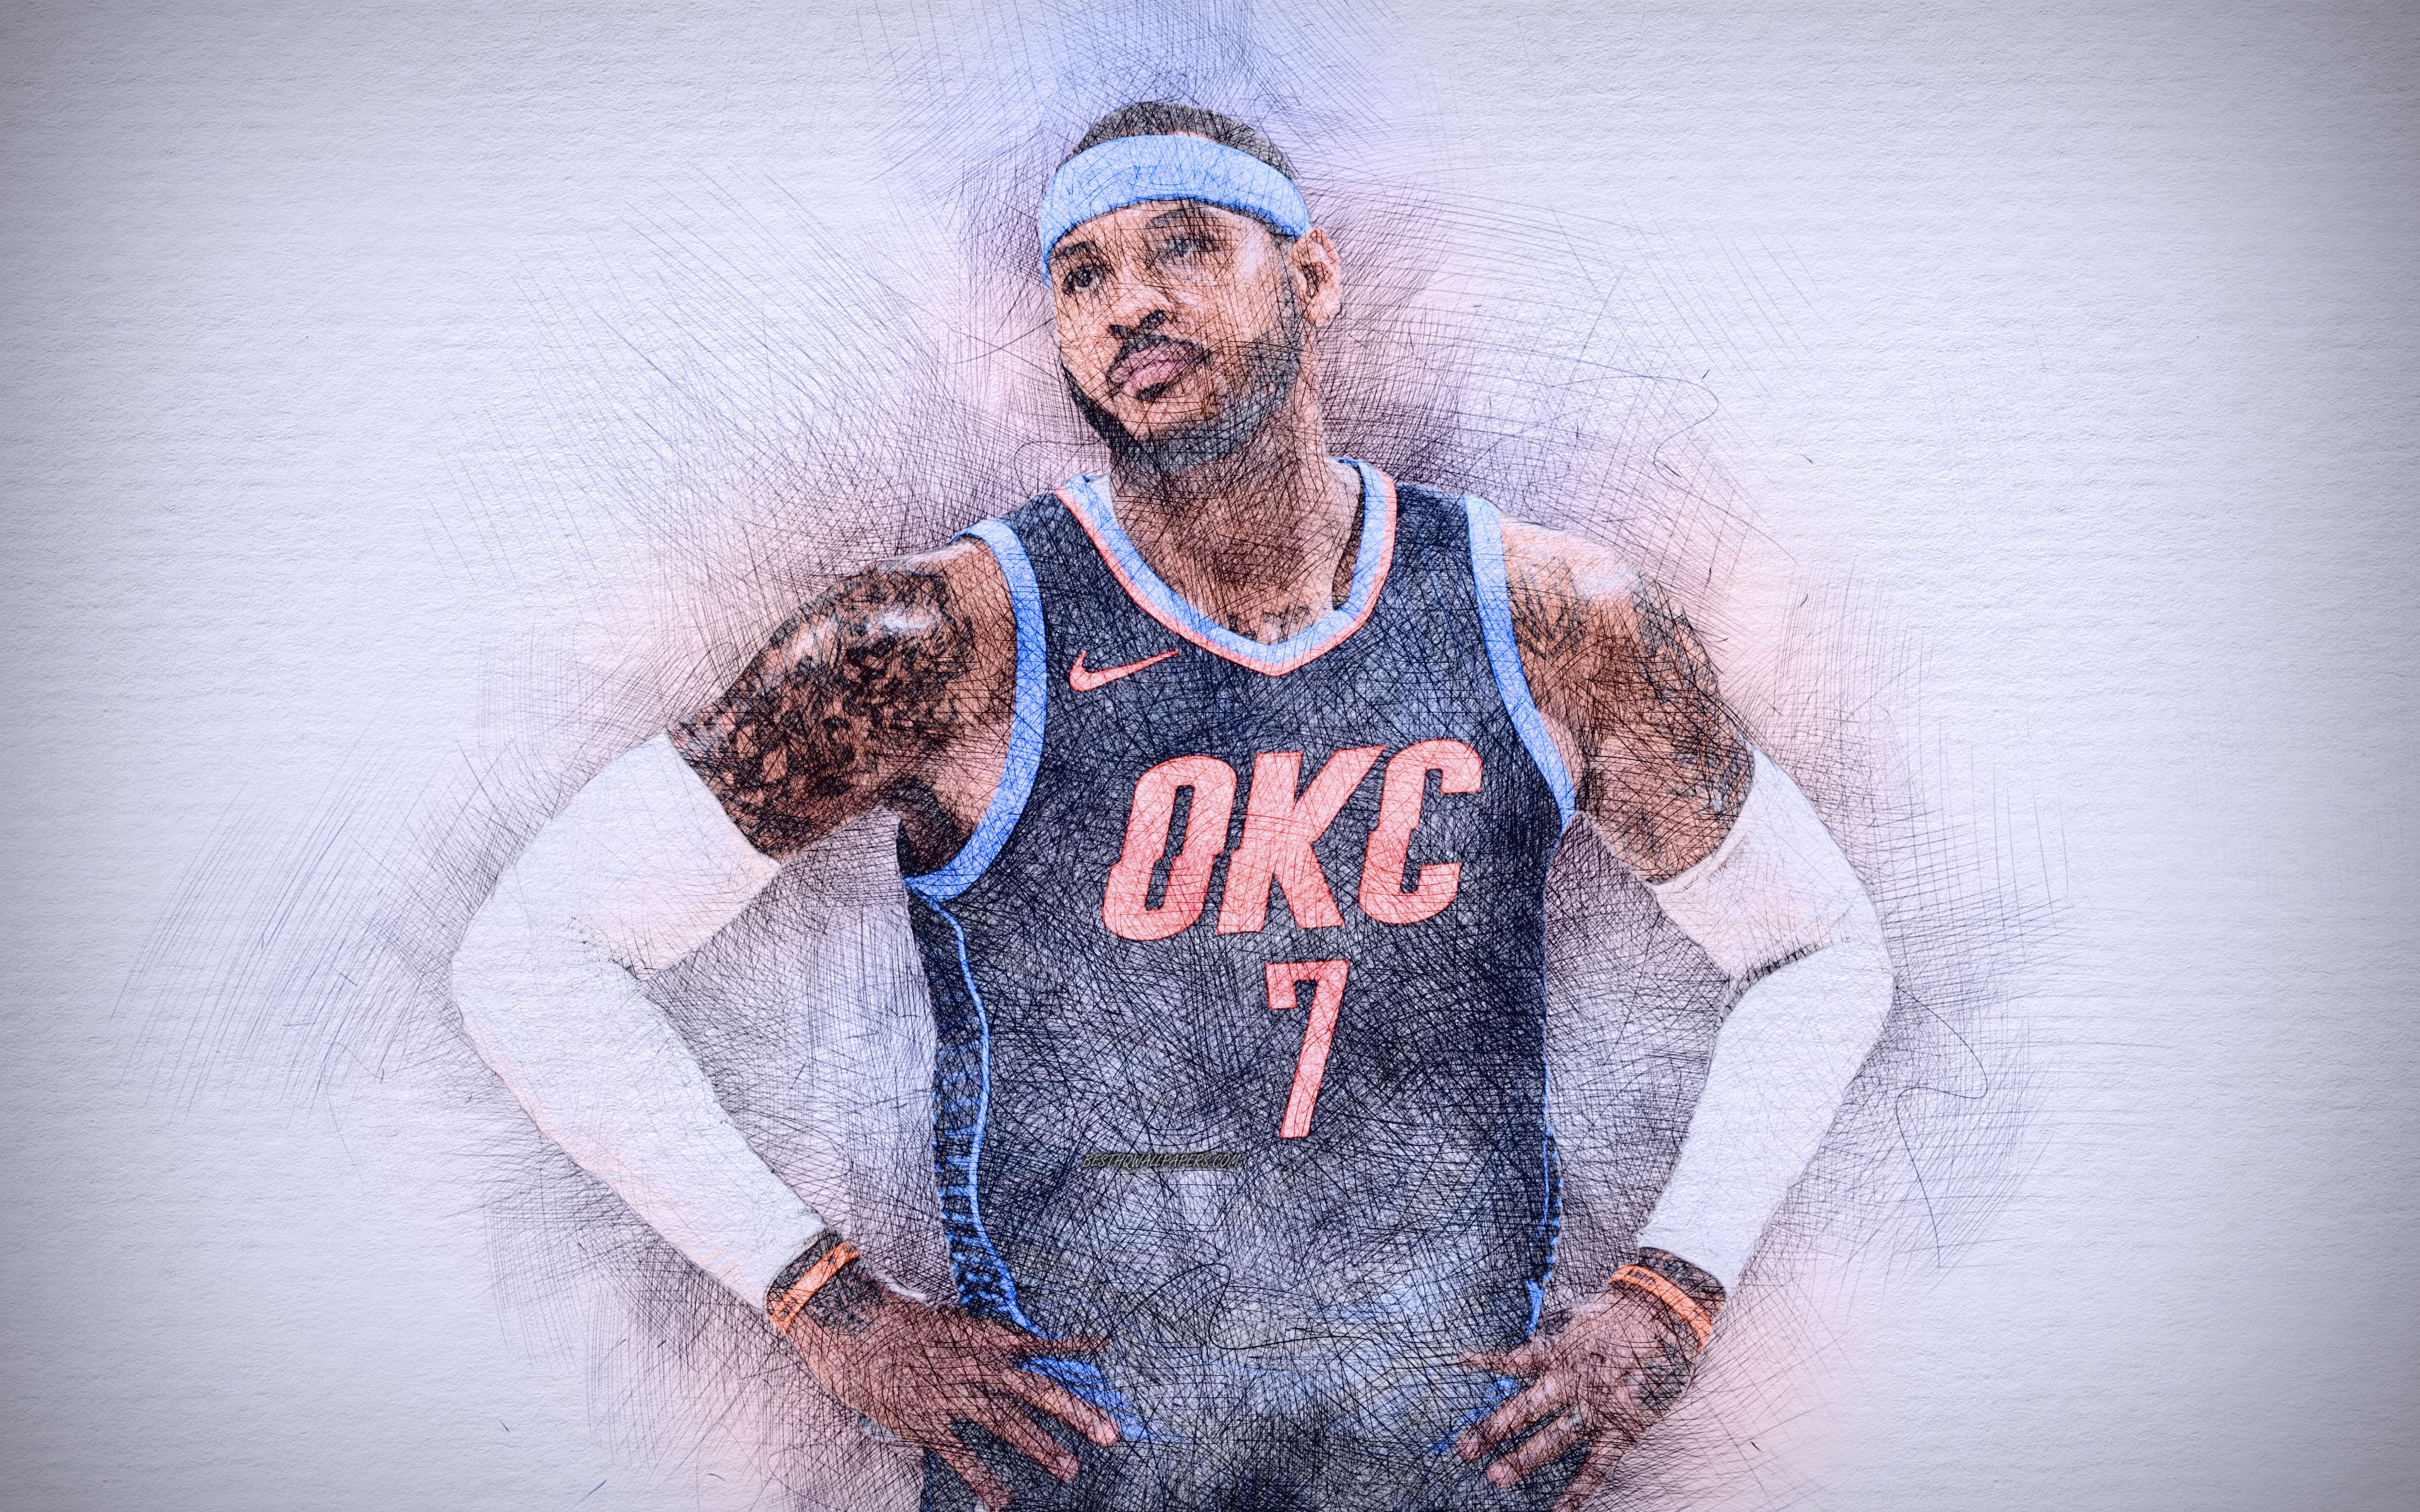 Download wallpaper Carmelo Anthony, 4k, artwork, basketball stars, Oklahoma City Thunder, NBA, basketball, OKC, drawing Carmelo Anthony for desktop with resolution 3840x2400. High Quality HD picture wallpaper